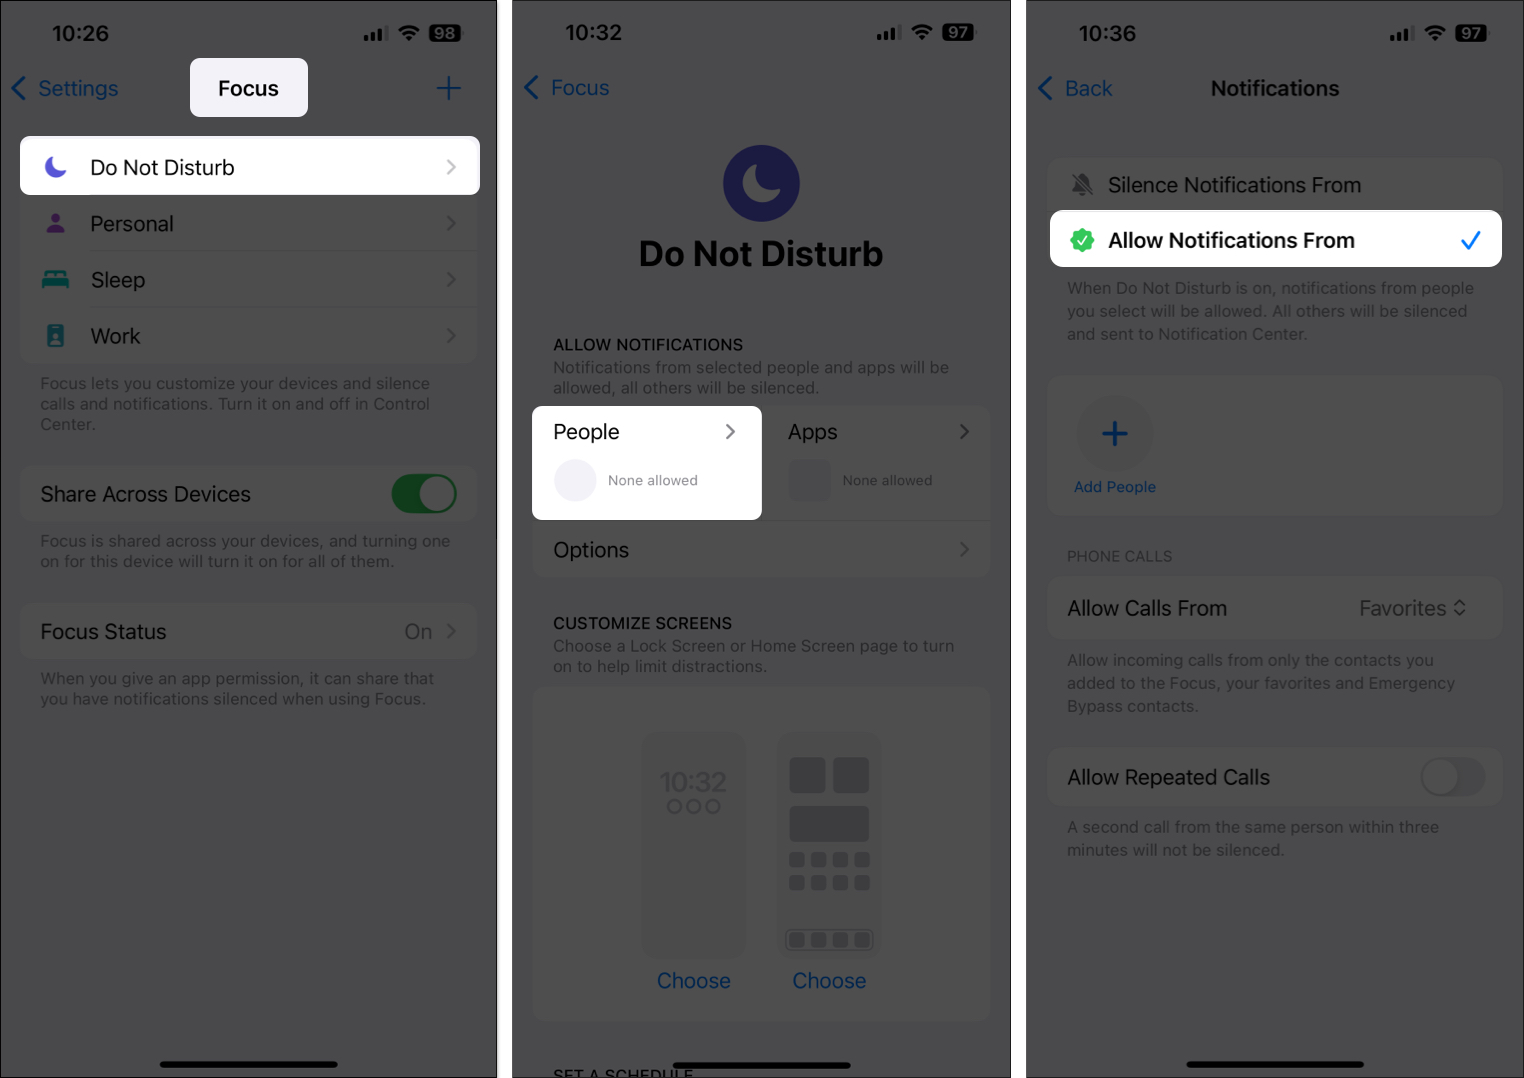 Allow Notifications From option in Do Not Disturb Focus setting on iPhone.